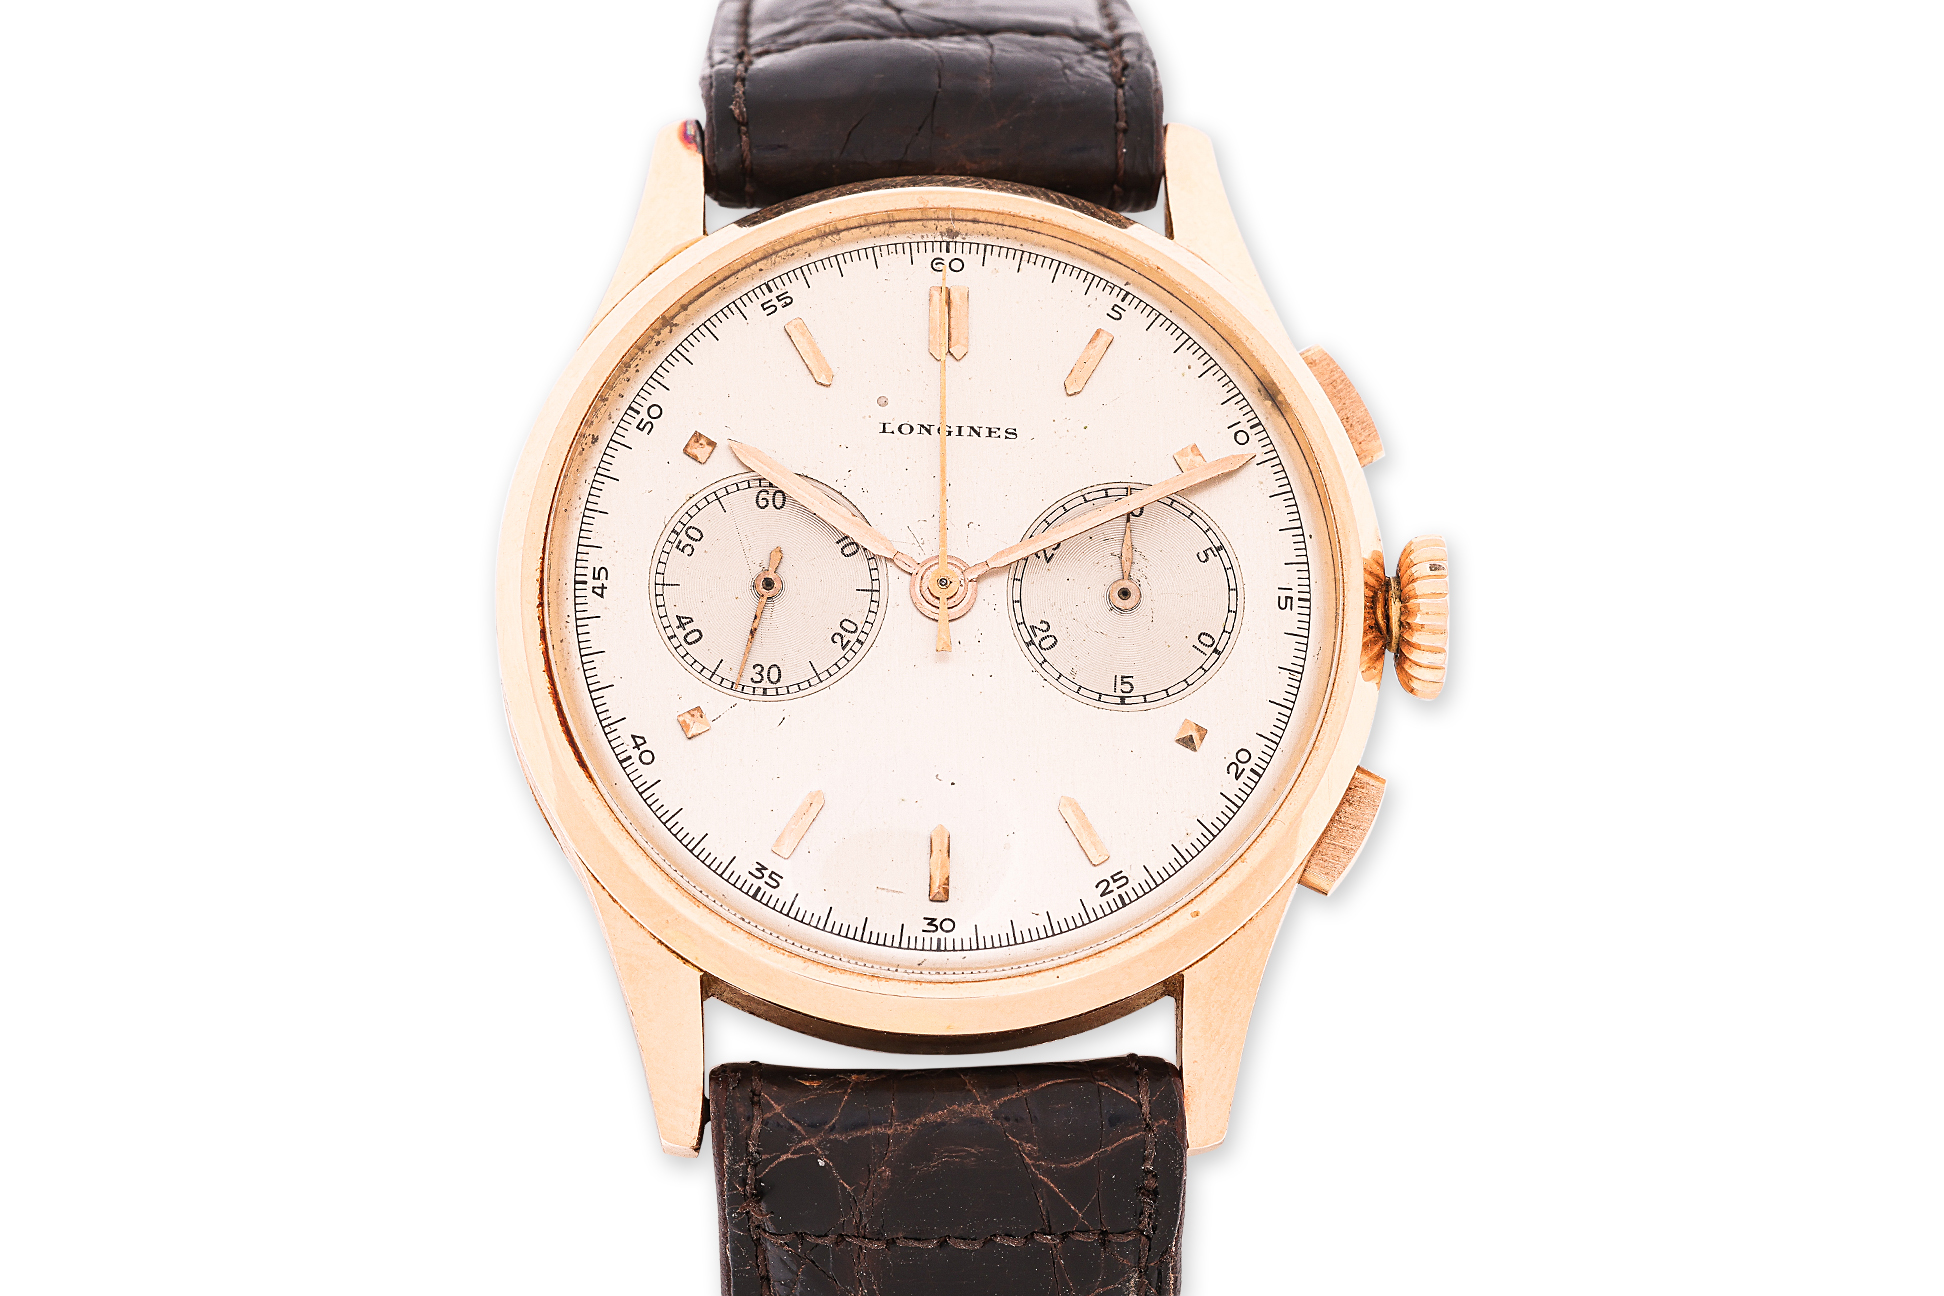 A LONGINES GOLD 13ZN FLYBACK CHRONOGRAPH WATCH